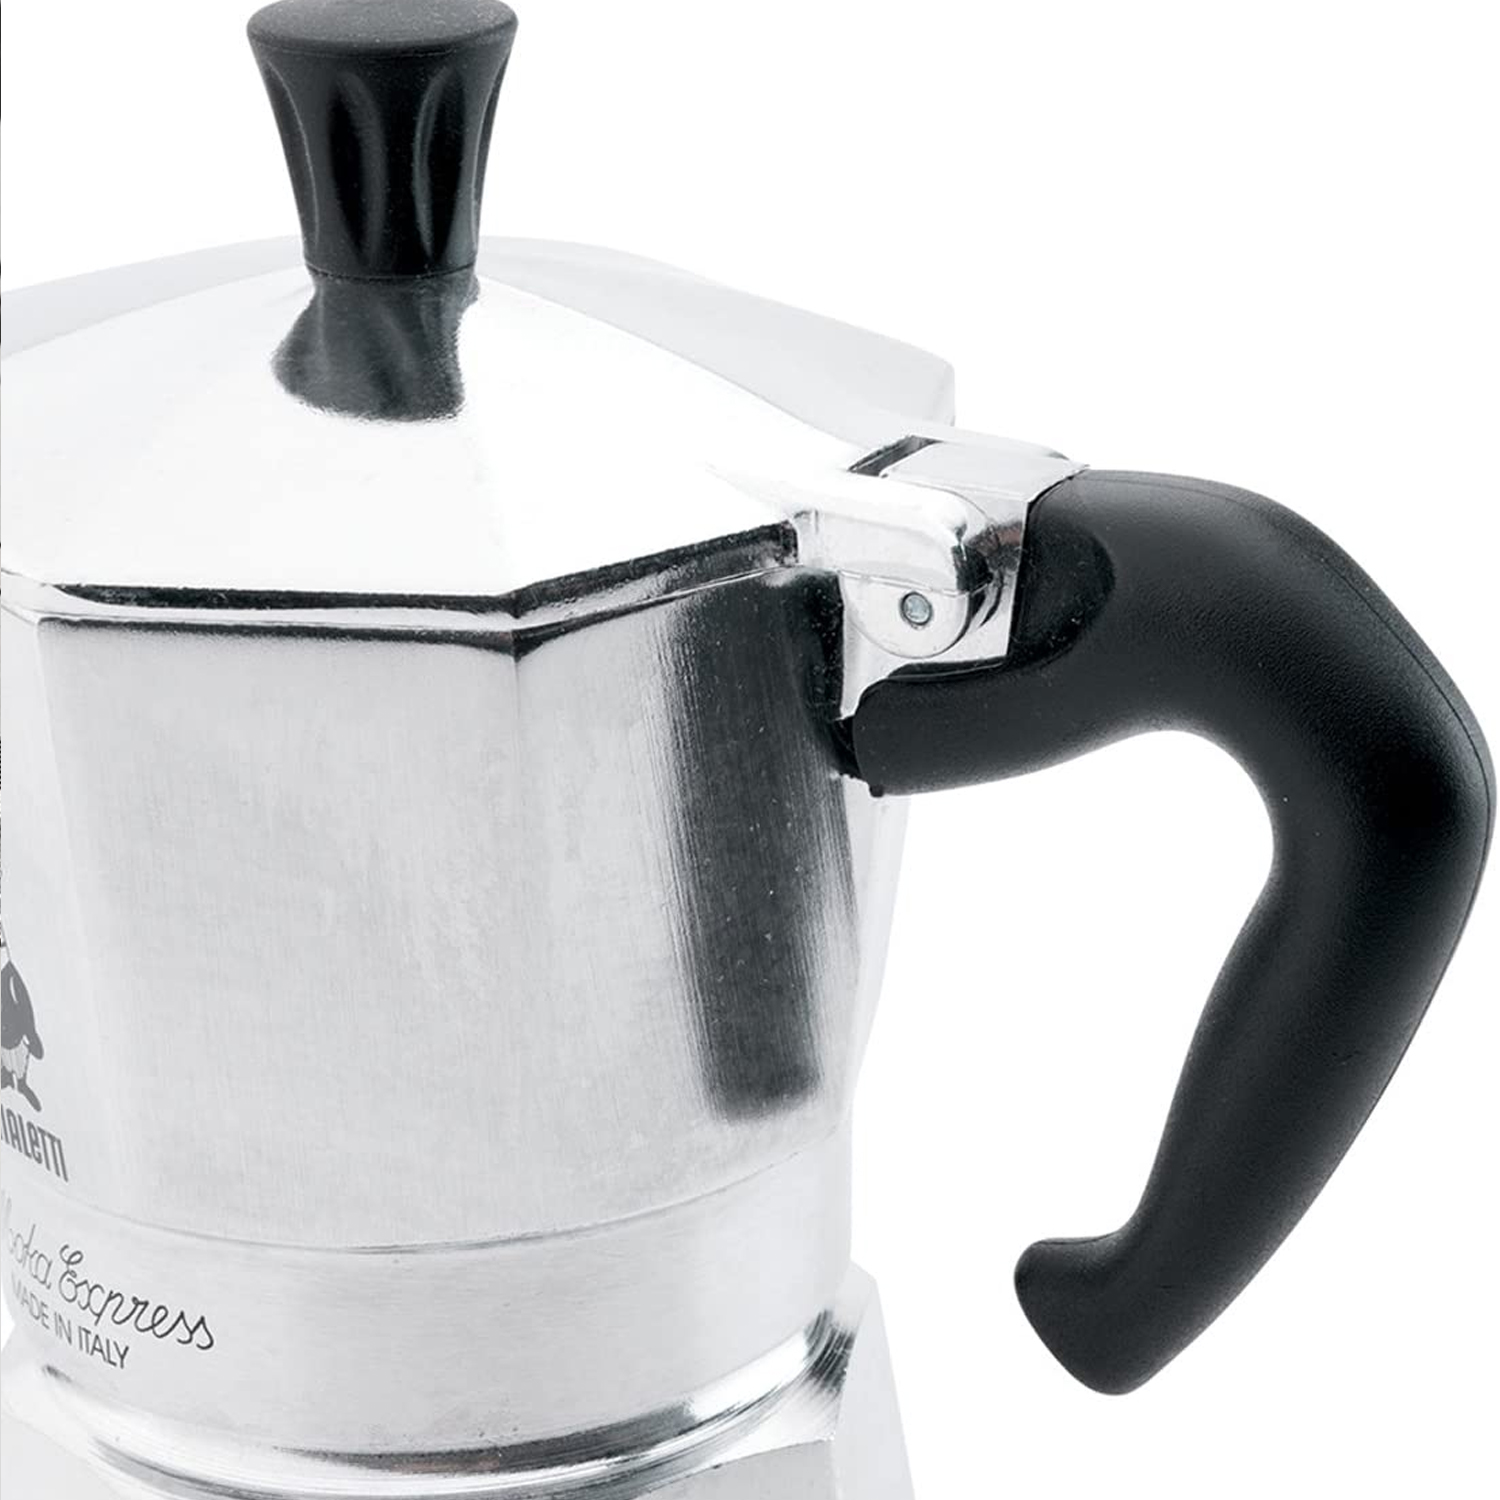 Bialetti Aluminum 6 Cup Stovetop Steamer Espresso Coffee Maker Brewer, Silver - image 3 of 7